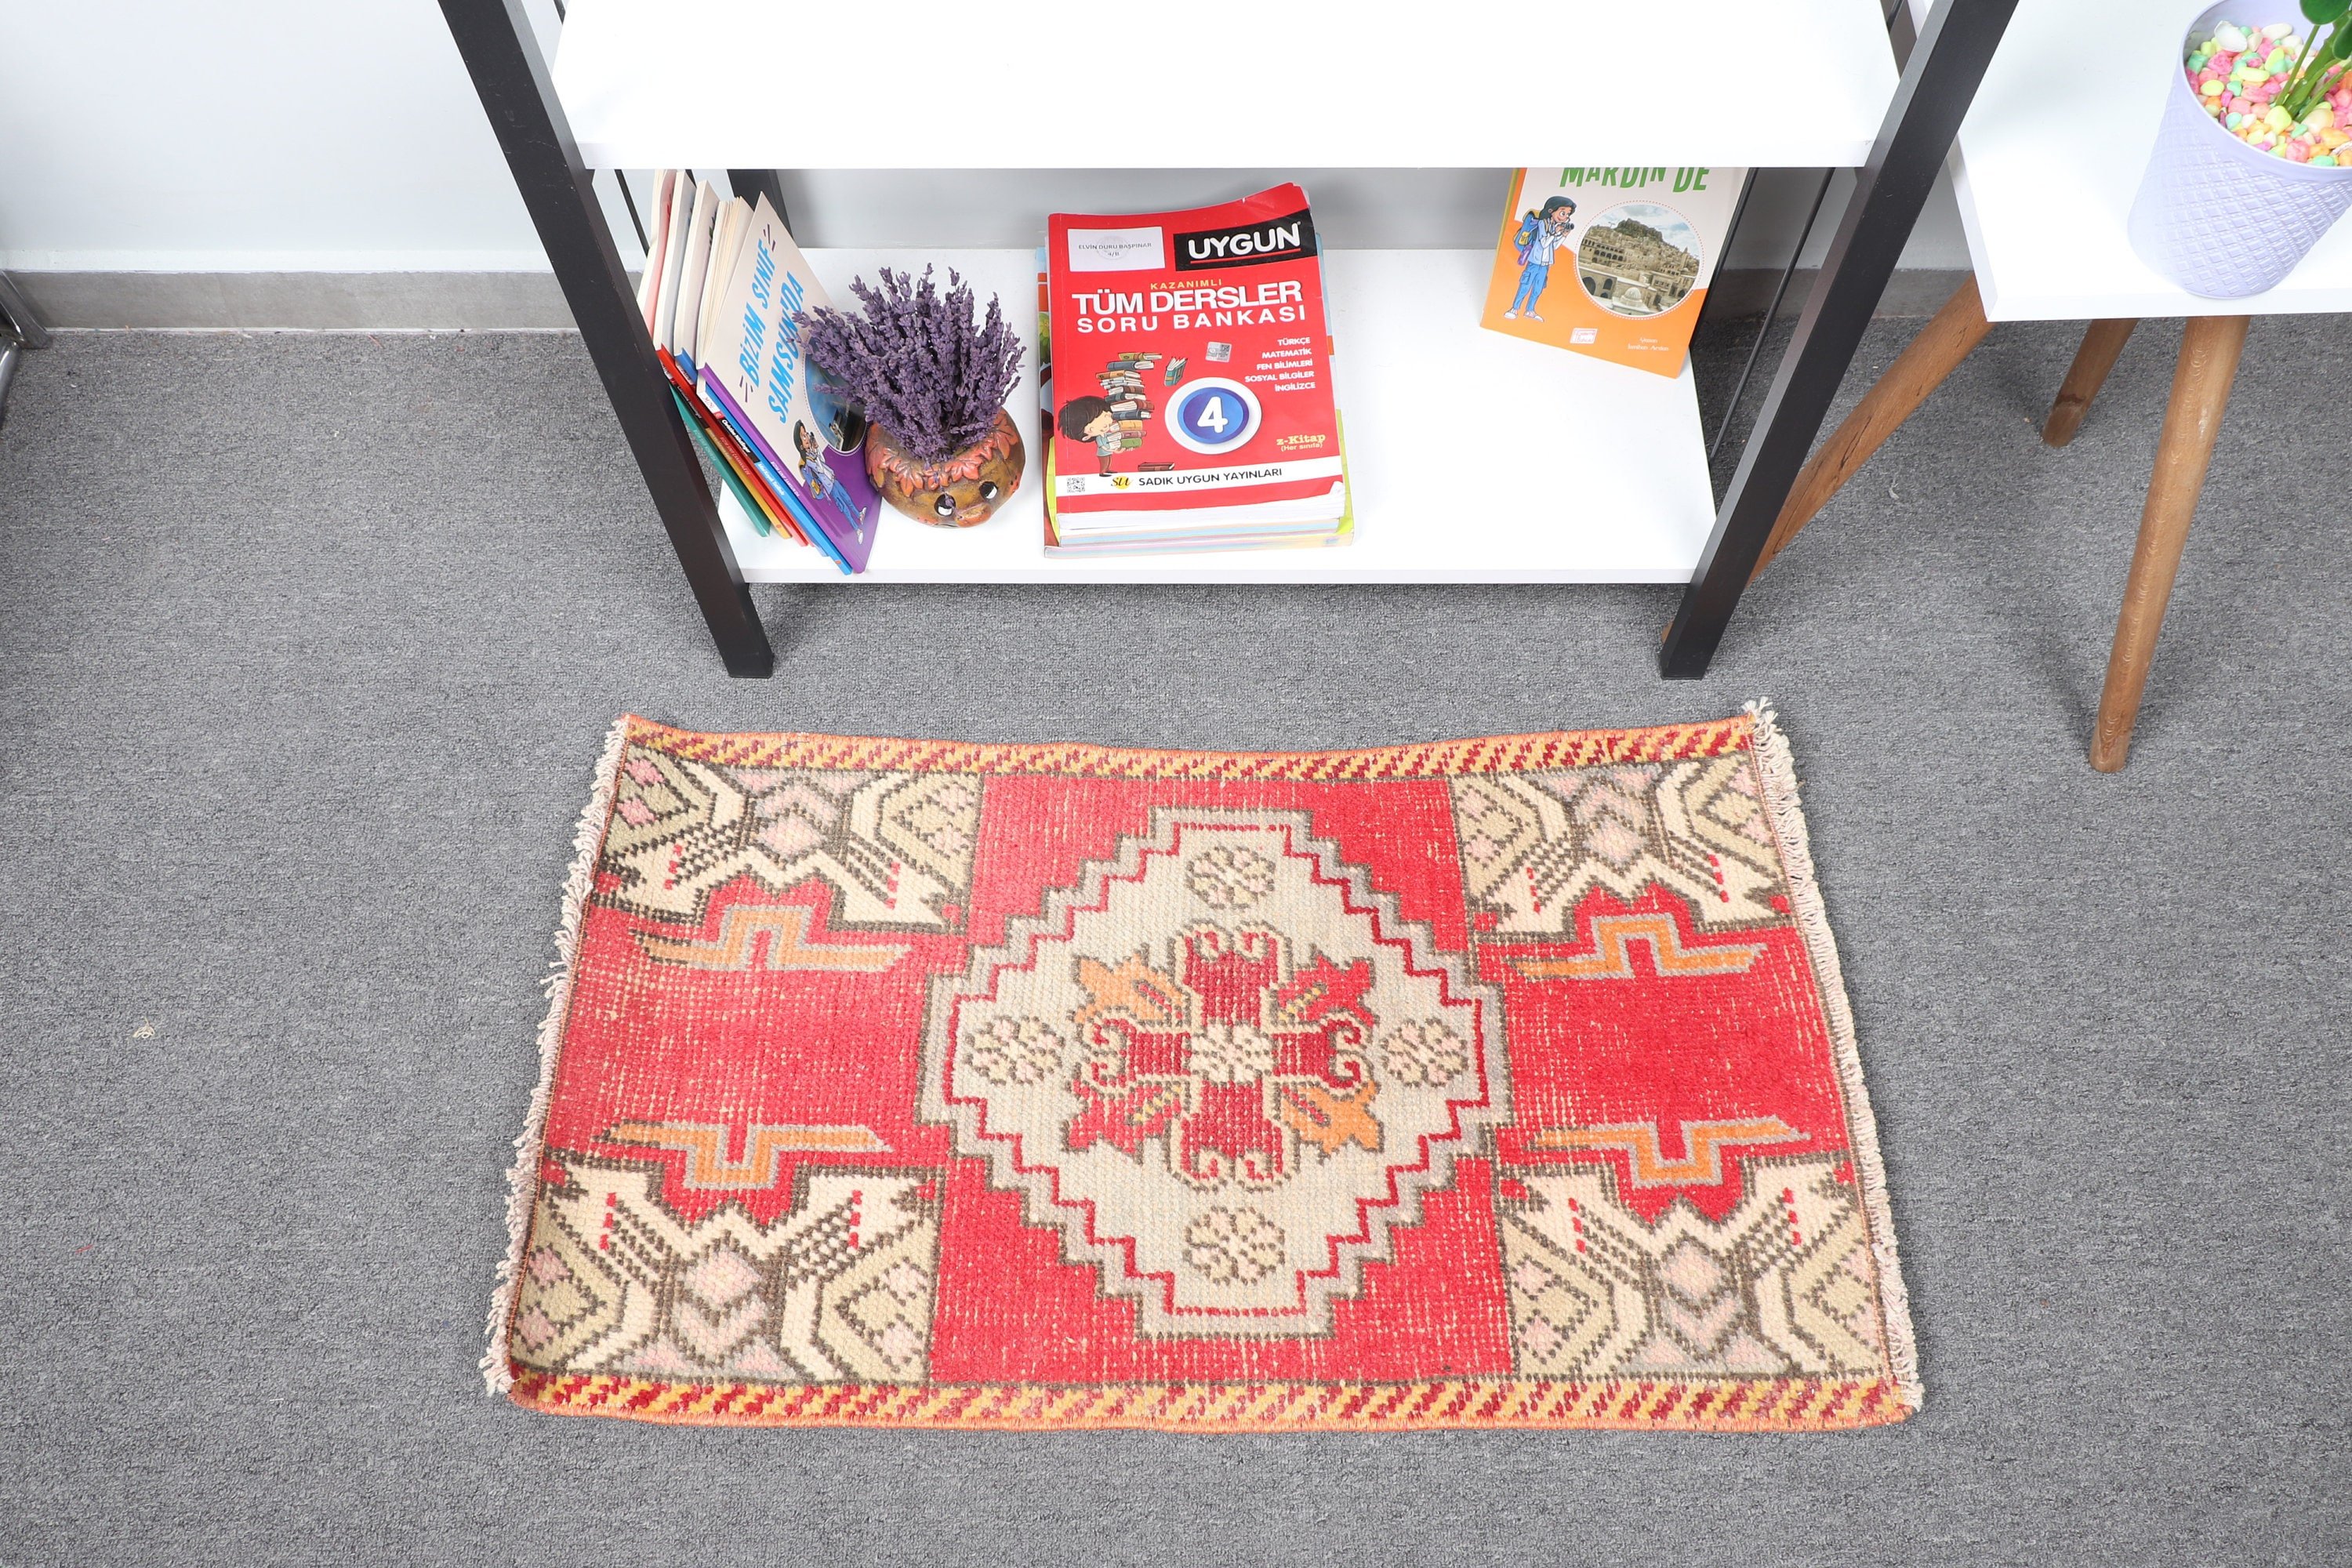 Red Home Decor Rug, Moroccan Rugs, Entry Rugs, Rugs for Bath, 1.5x2.7 ft Small Rug, Bedroom Rug, Turkish Rug, Car Mat Rugs, Vintage Rug